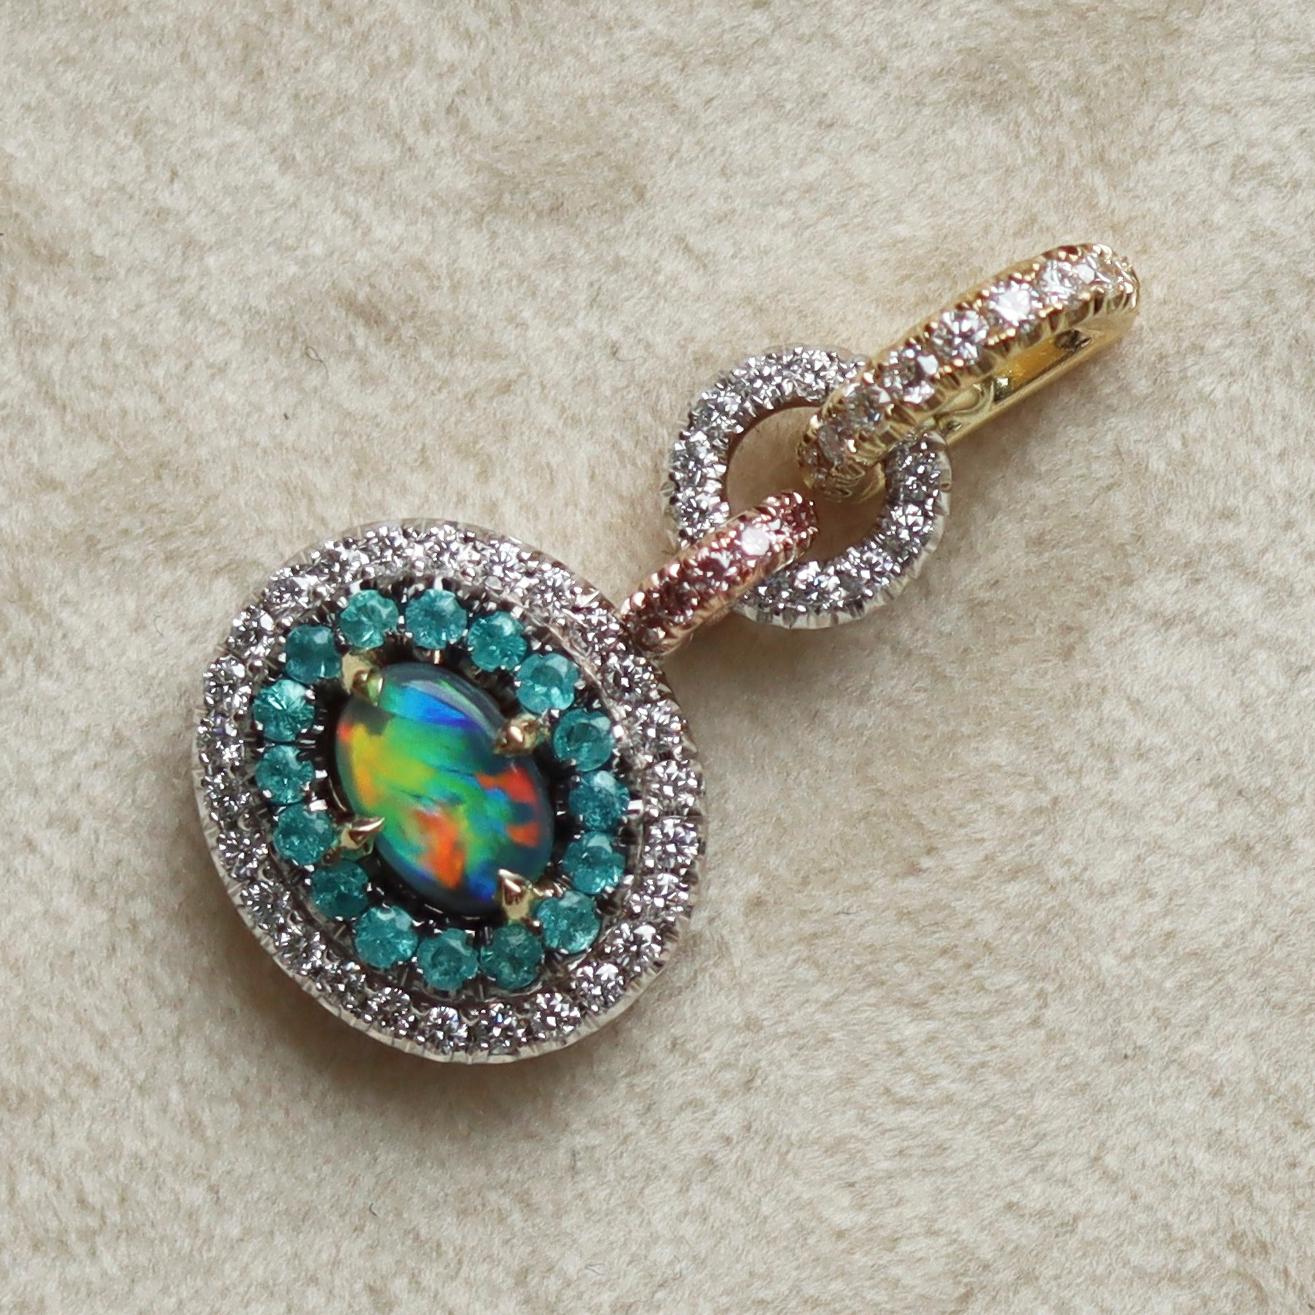 This one of a kind double halo pendant is handmade in Belgium the traditional way, by jewelry artist Joke Quick,  ( no casting or printing envolved) in 18 K Rose, yellow & white gold and is hand set with a Lightning Ridge Black Opal centerstone,